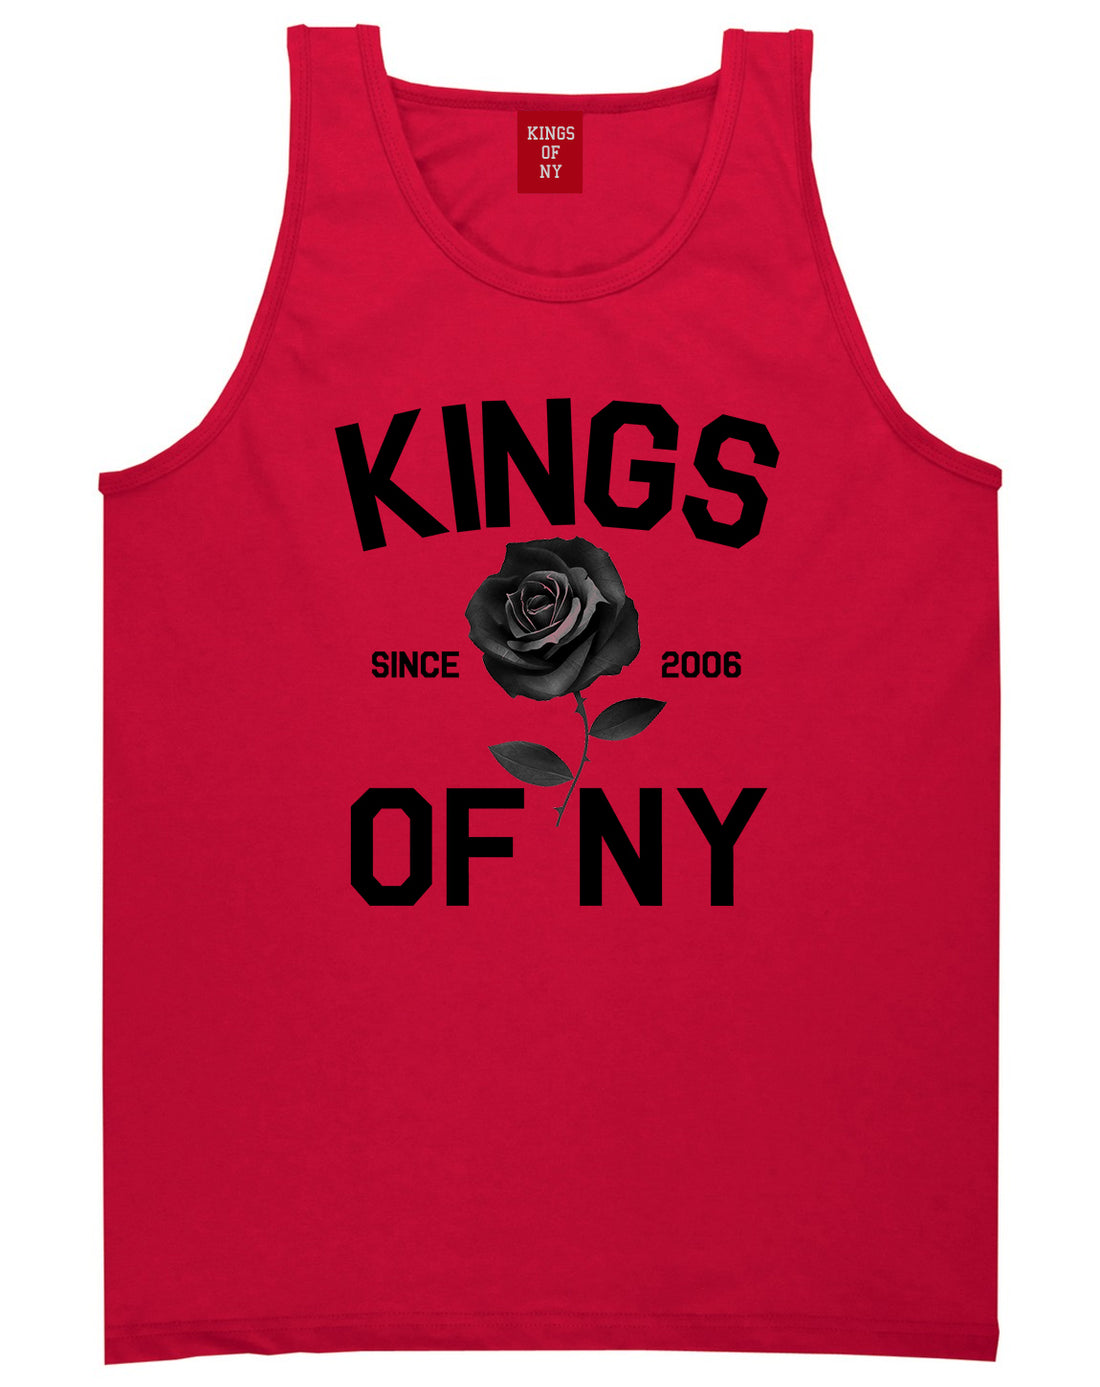 Black Rose Since 2006 Mens Tank Top Shirt Red by Kings Of NY